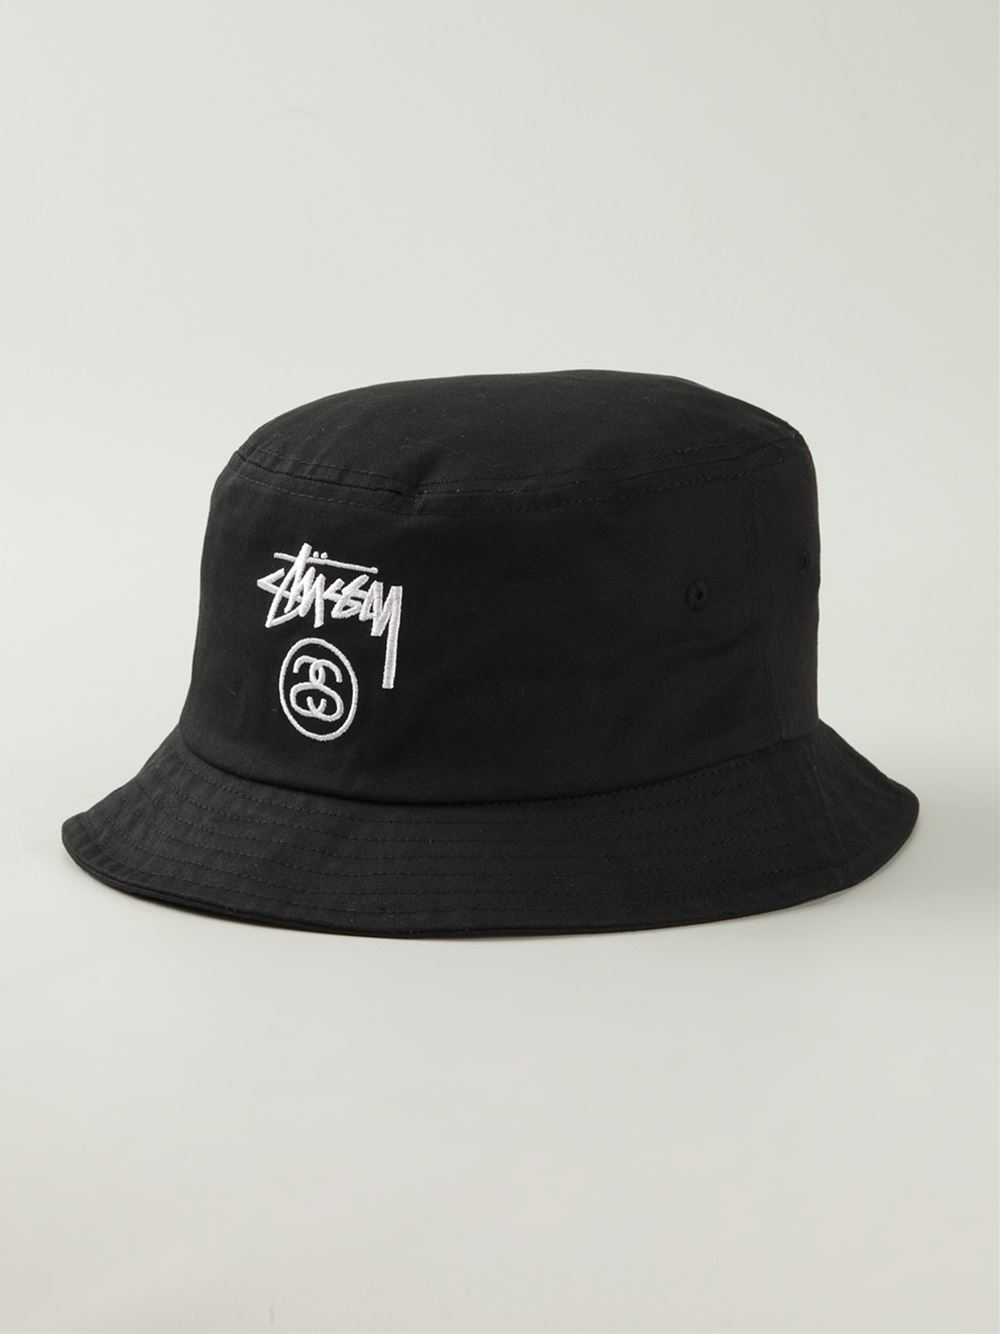 Stussy Logo Embroidered Bucket Hat in Black for Men - Lyst